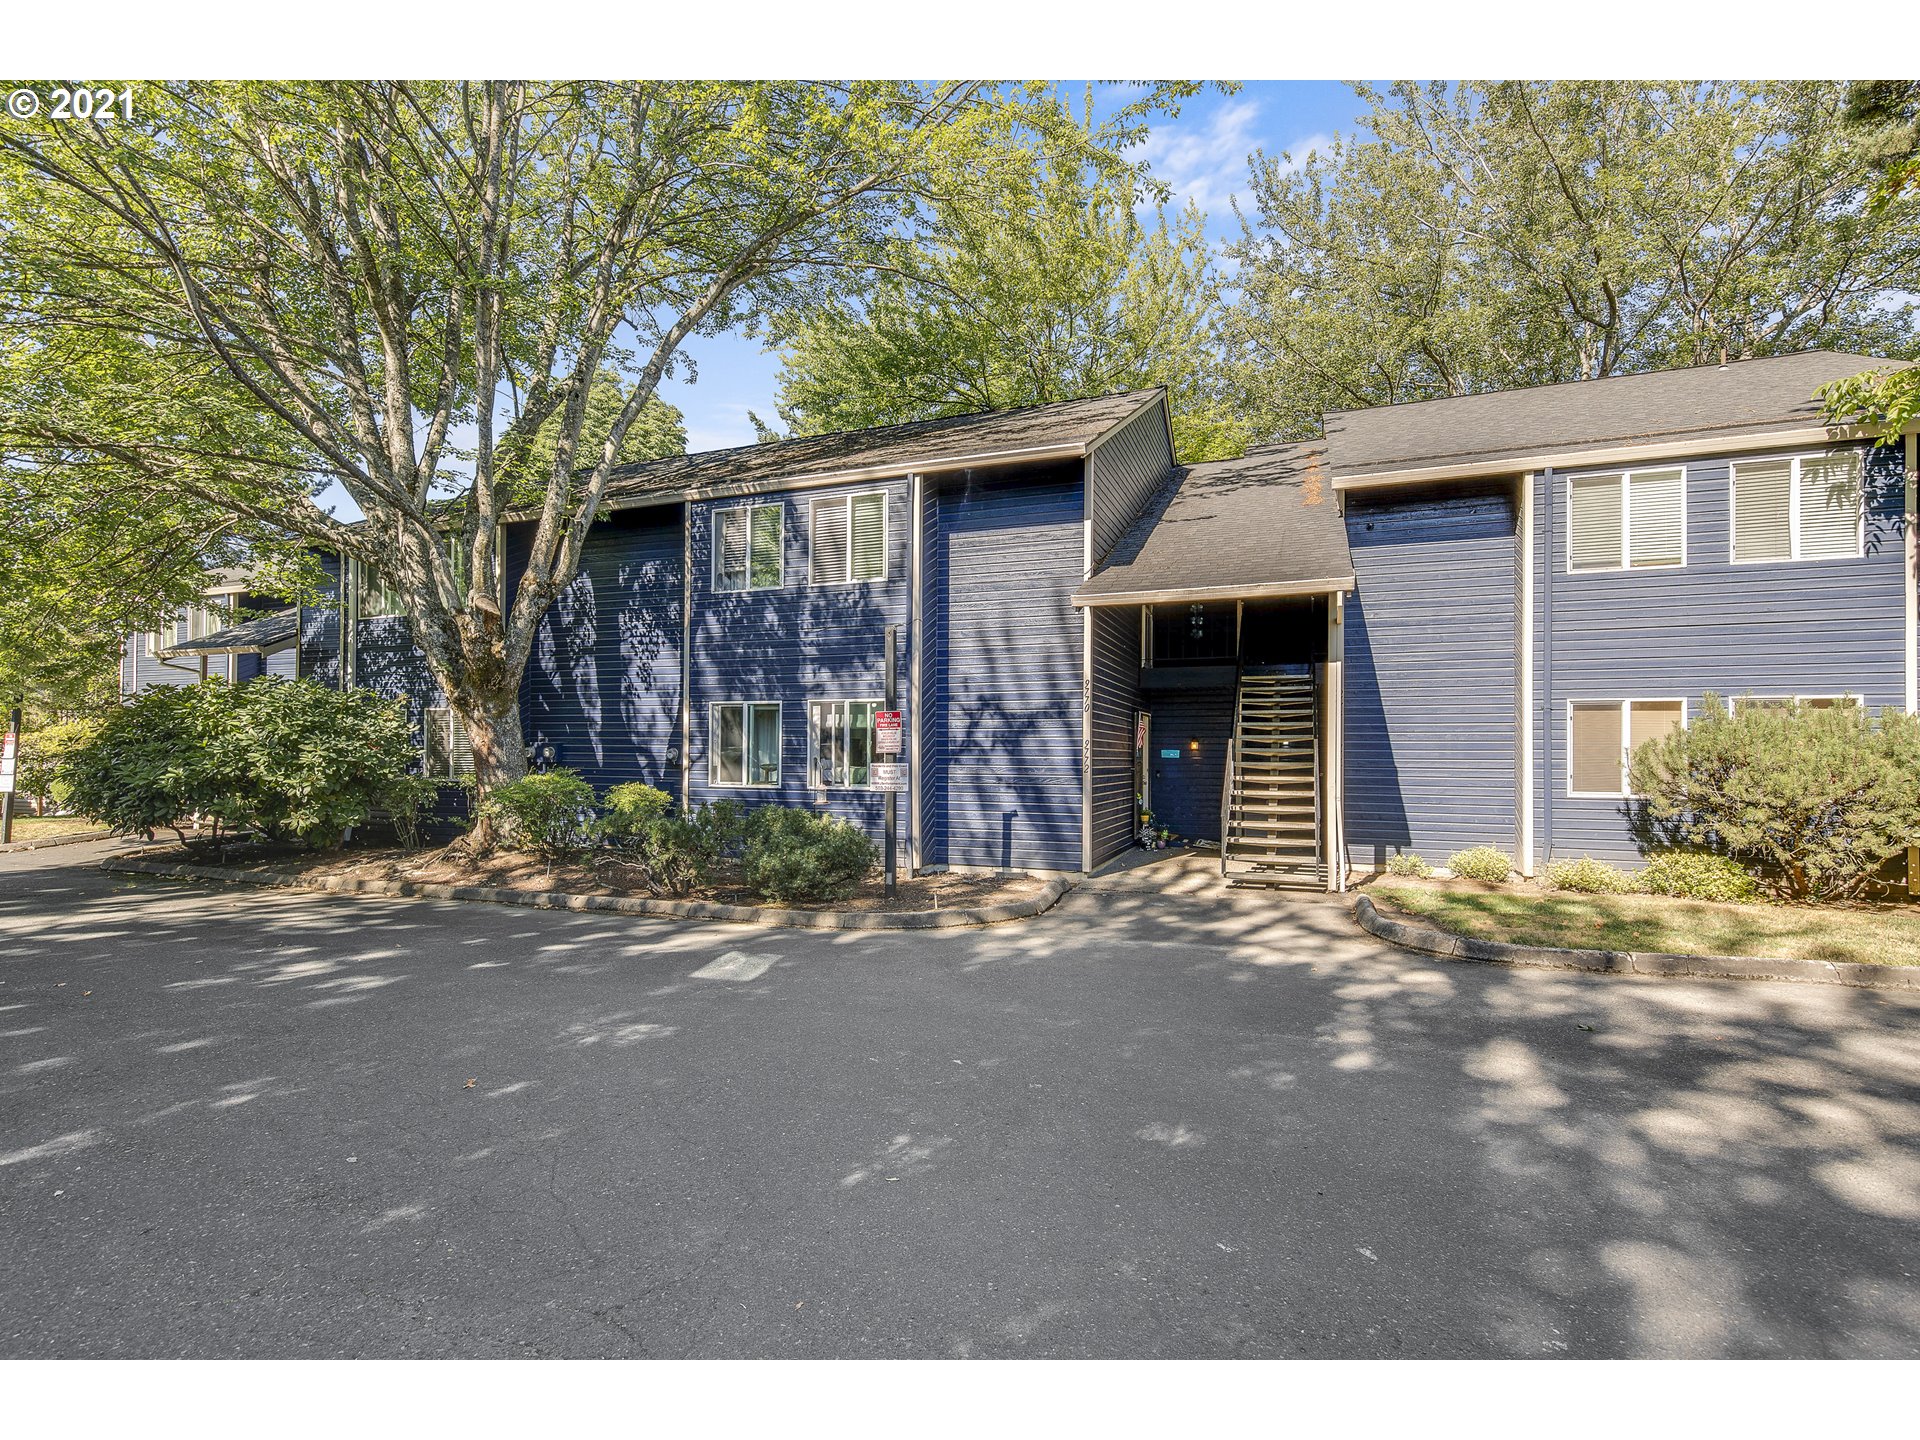 More Details about MLS # 21669732 : 9770 SW TUALATIN RD 